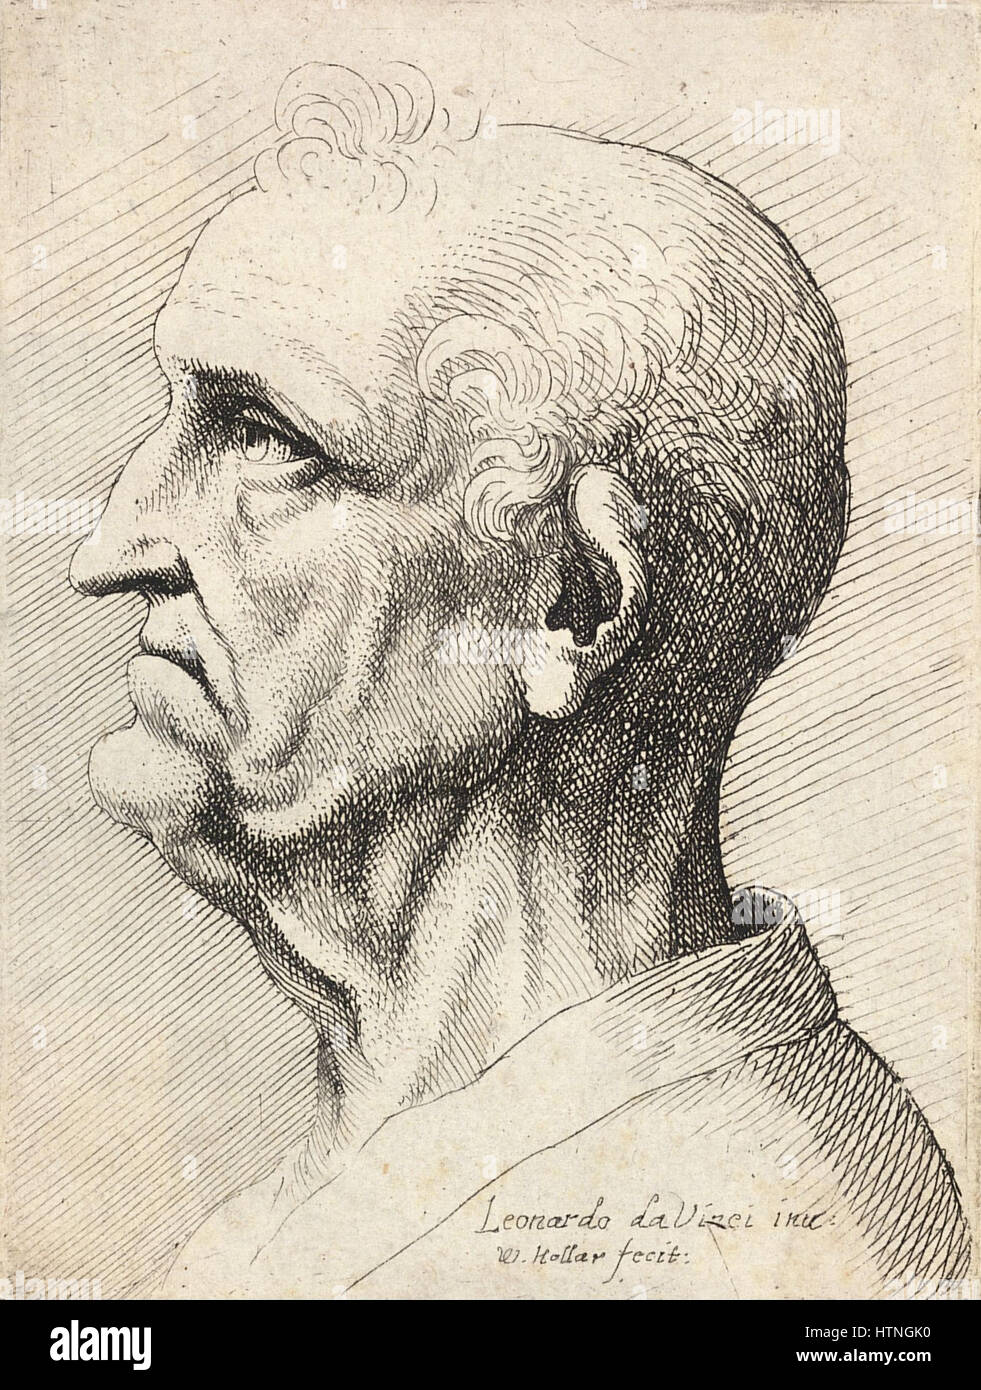 Wenceslas Hollar - Old man with pointed nose and prominent chin Stock Photo